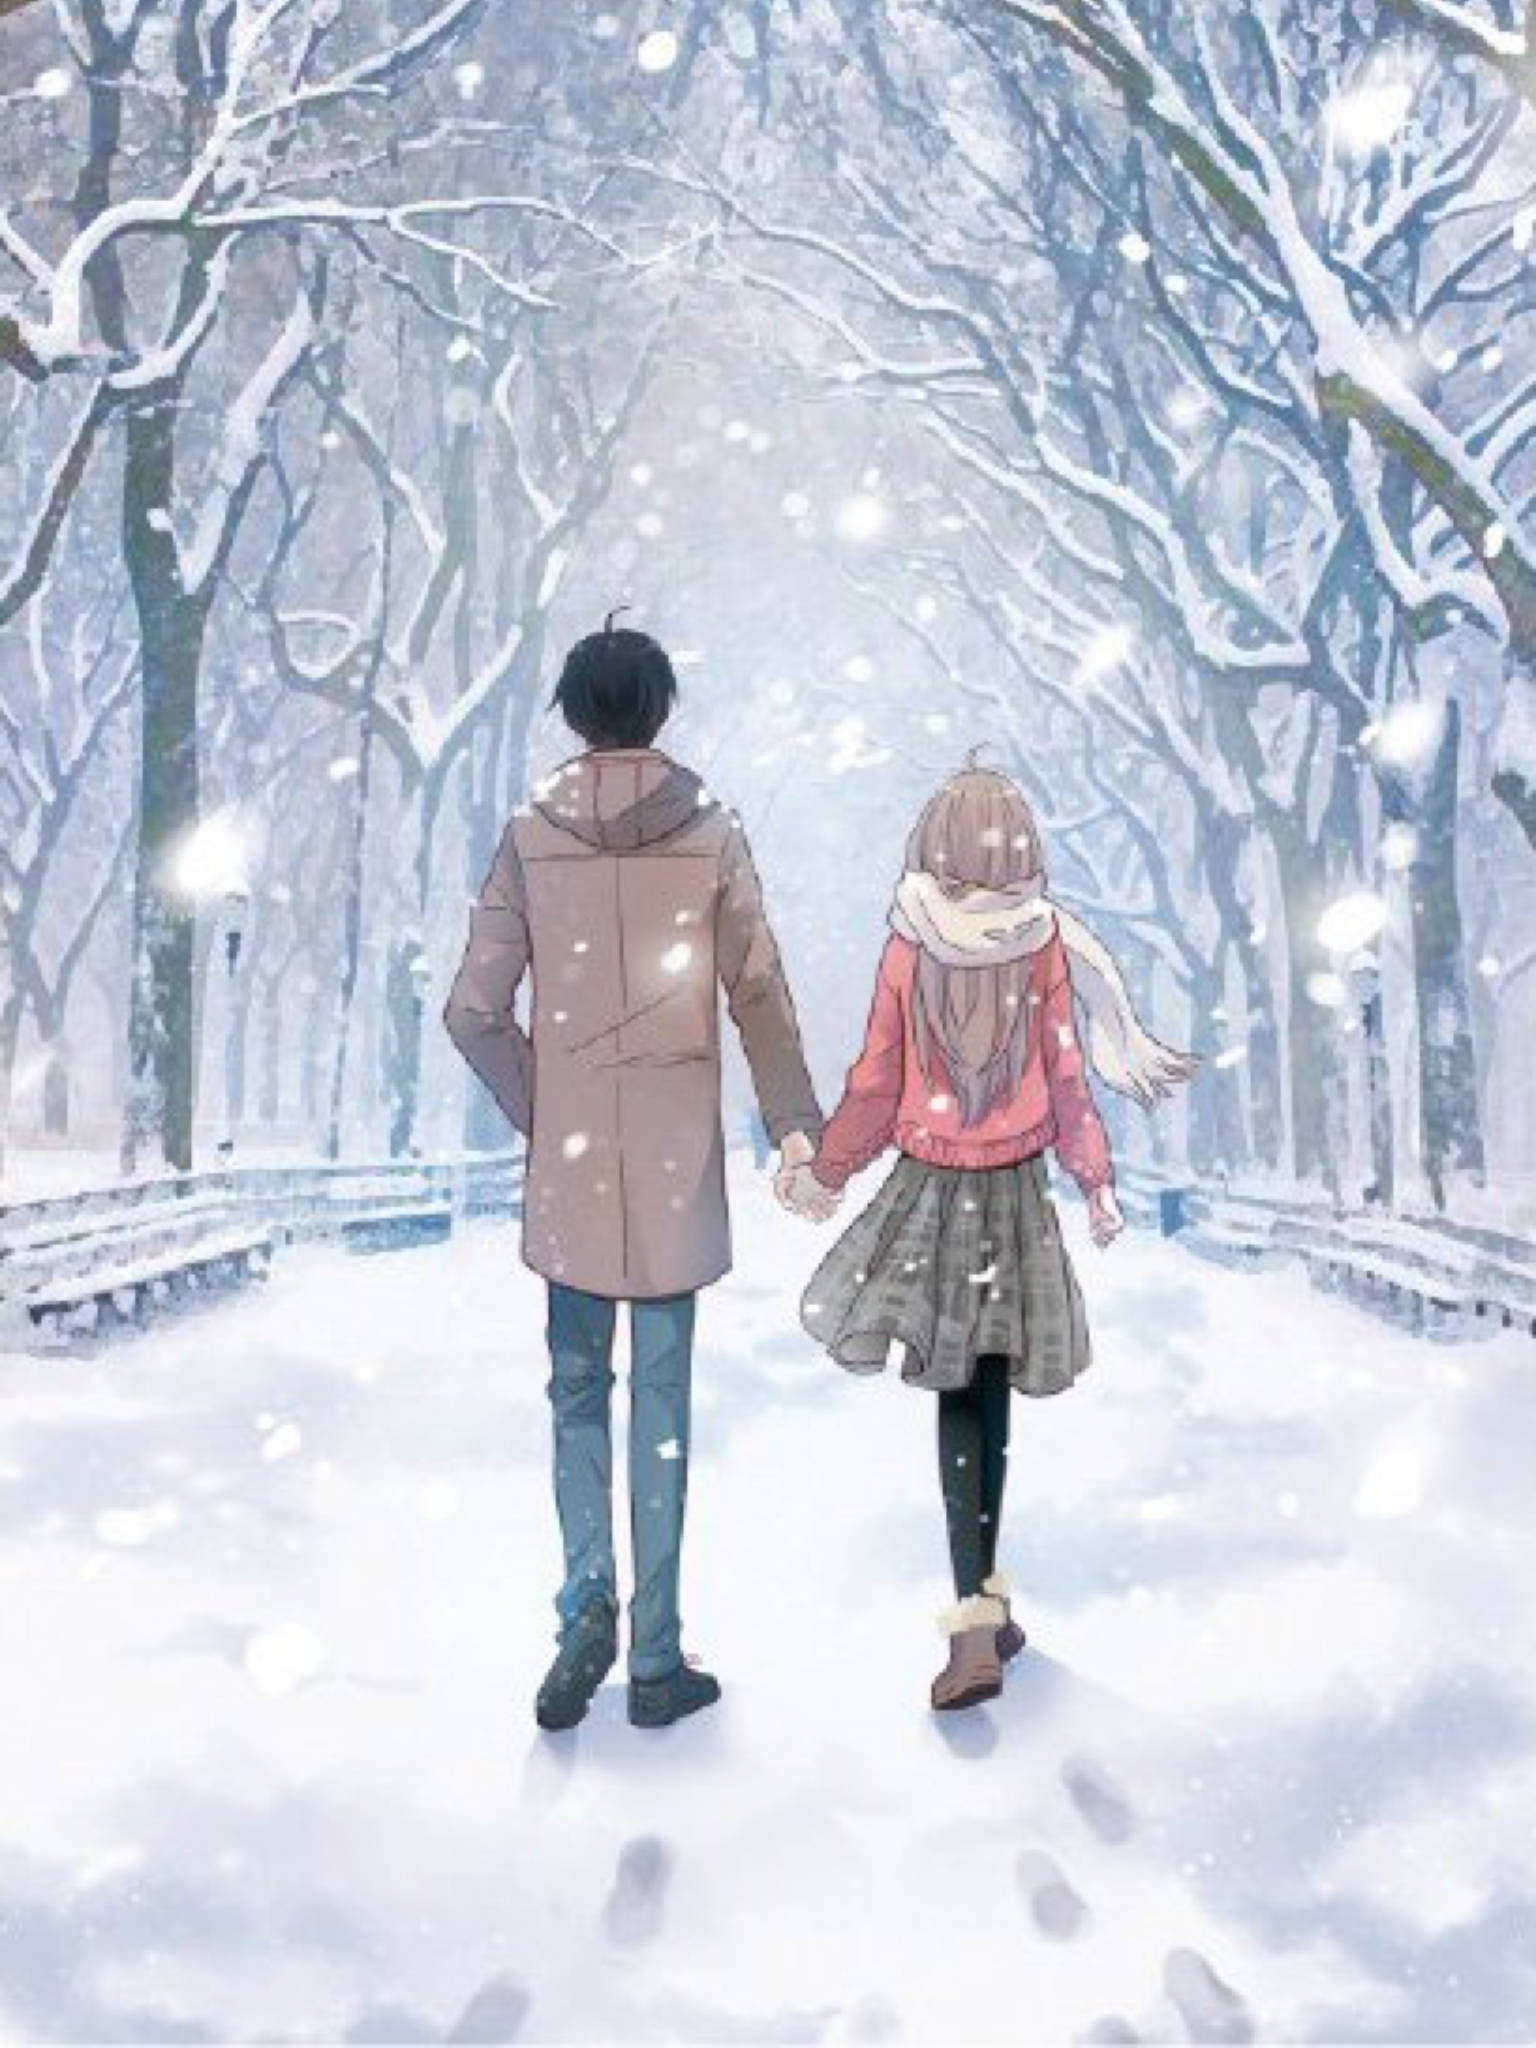 Download Japanese Anime Couple In Winter Wallpaper | Wallpapers.com